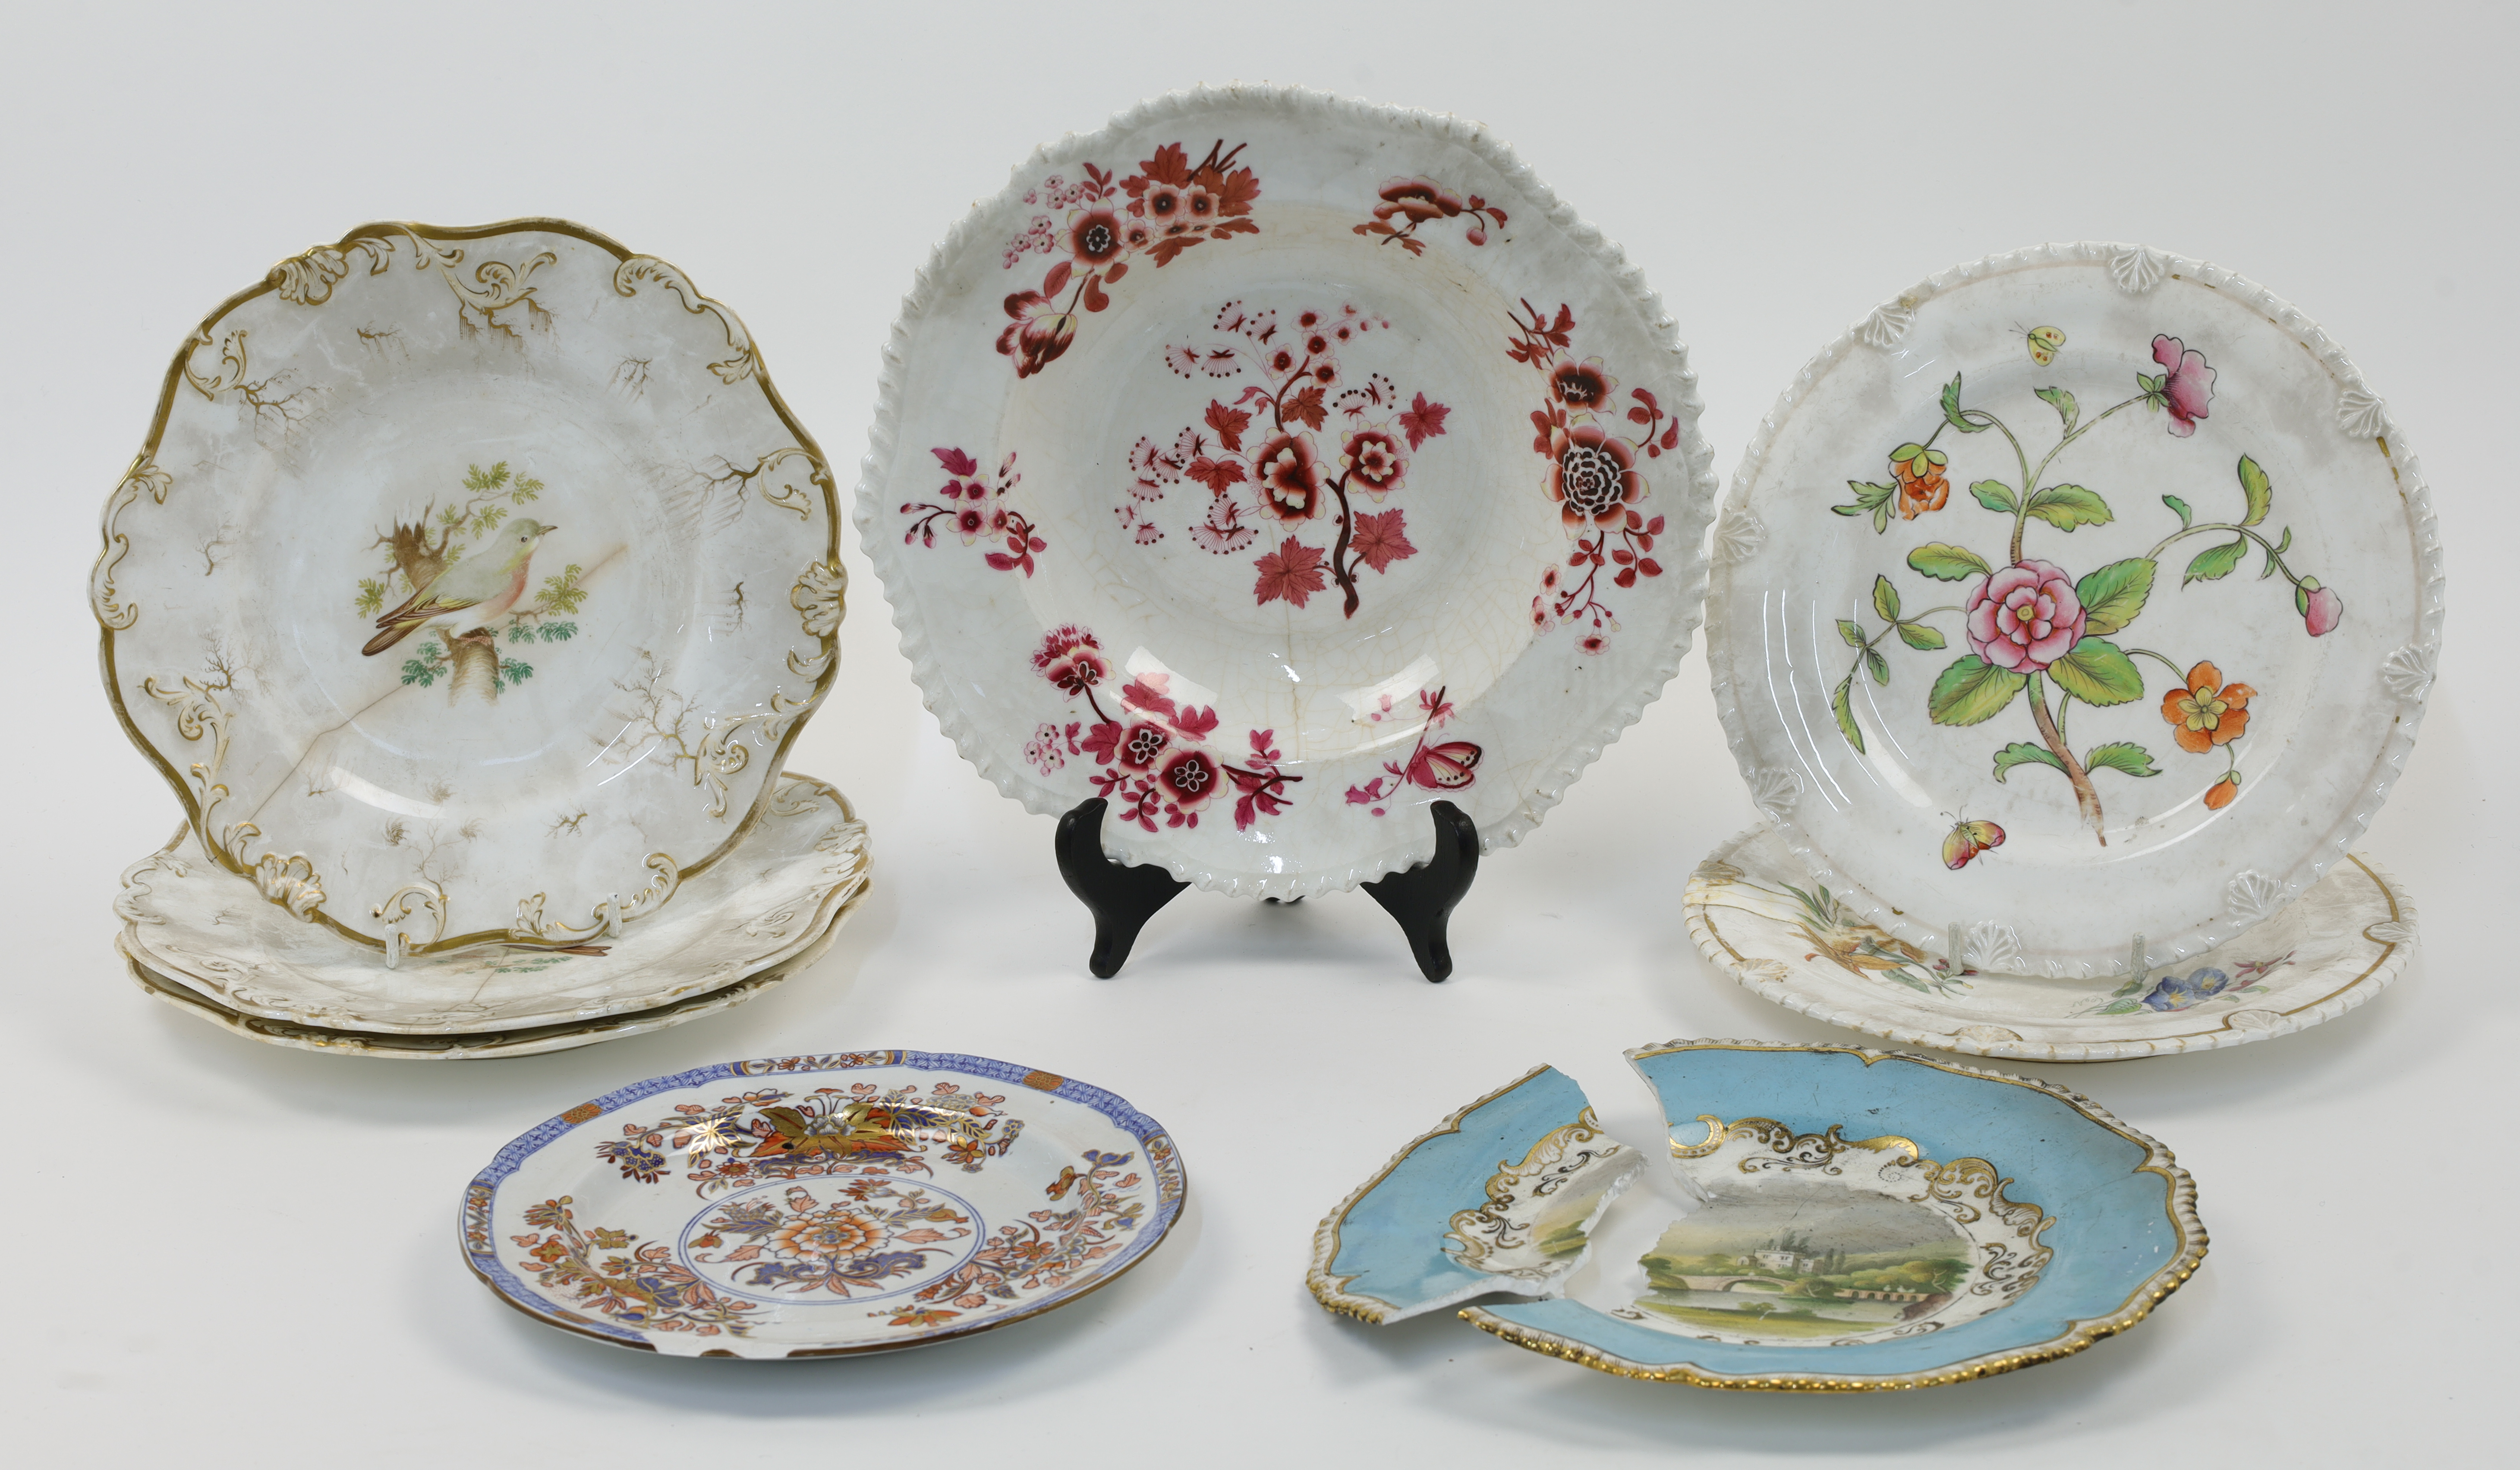 A collection of English porcelain plates and dishes, 19th century, to include examples by Mason's... - Image 2 of 2